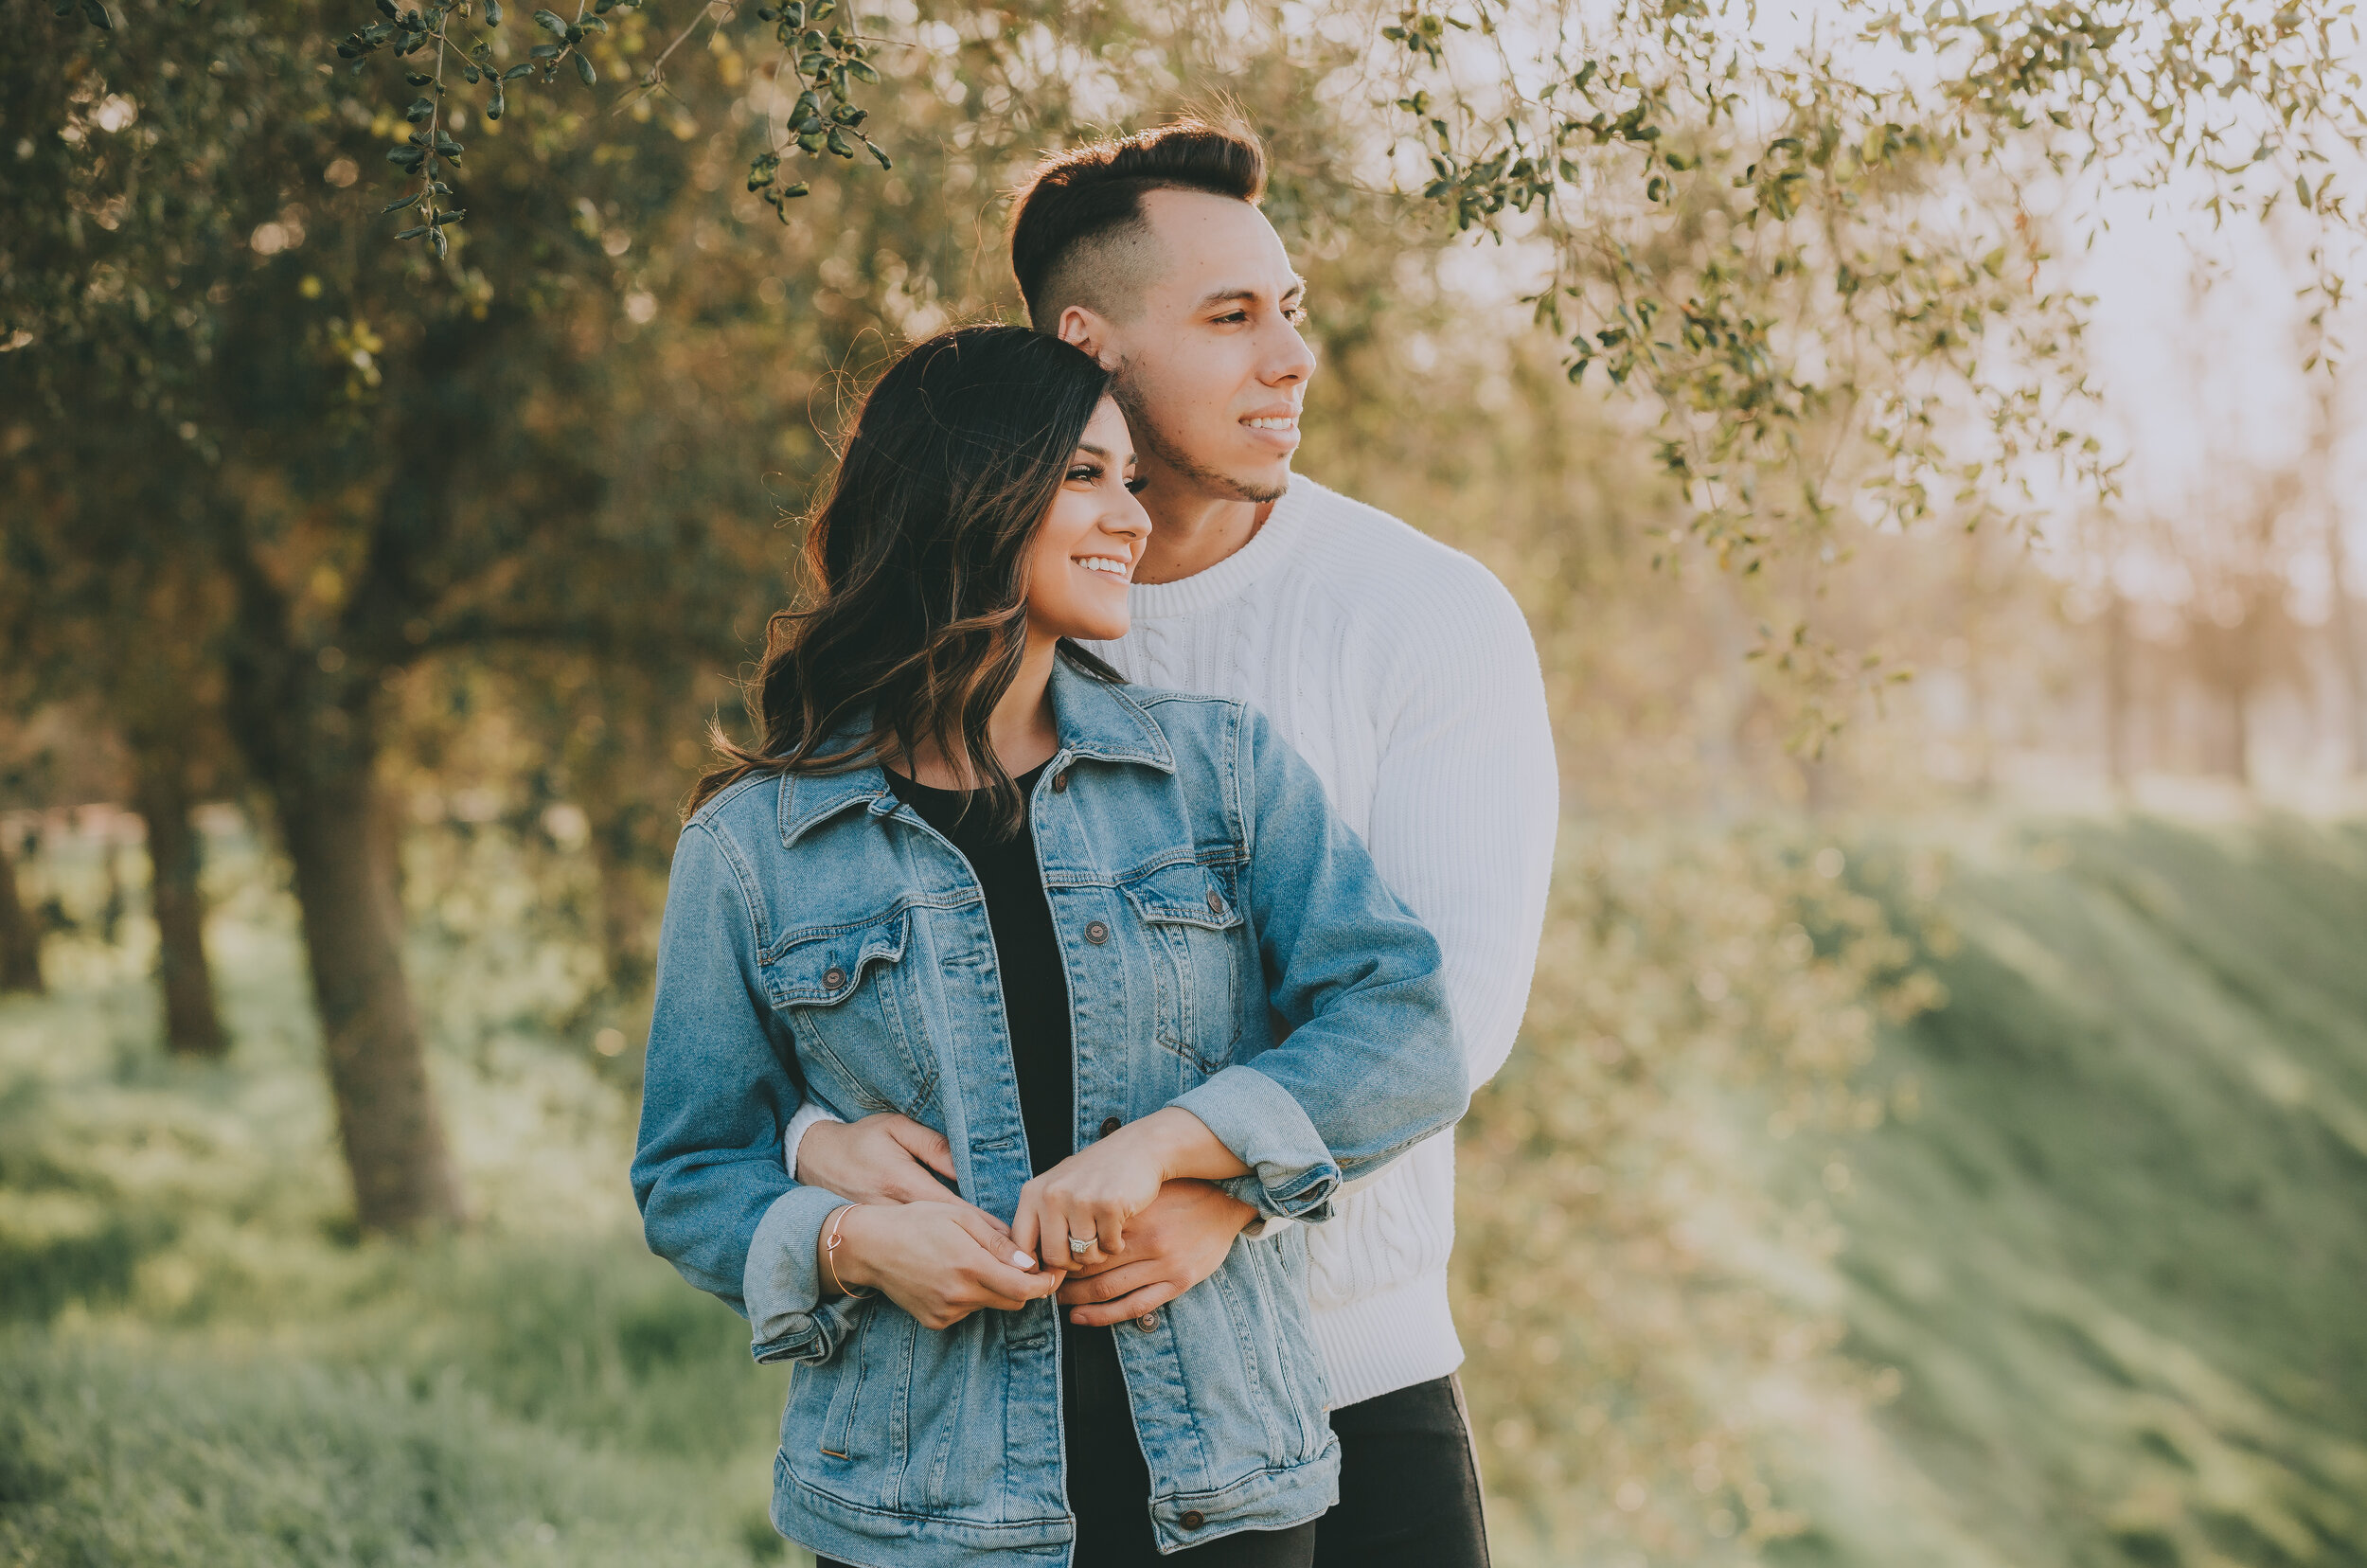 Fresno Engagament Photos - The Clausen Gallery - Samantha and Jesus-7.jpg